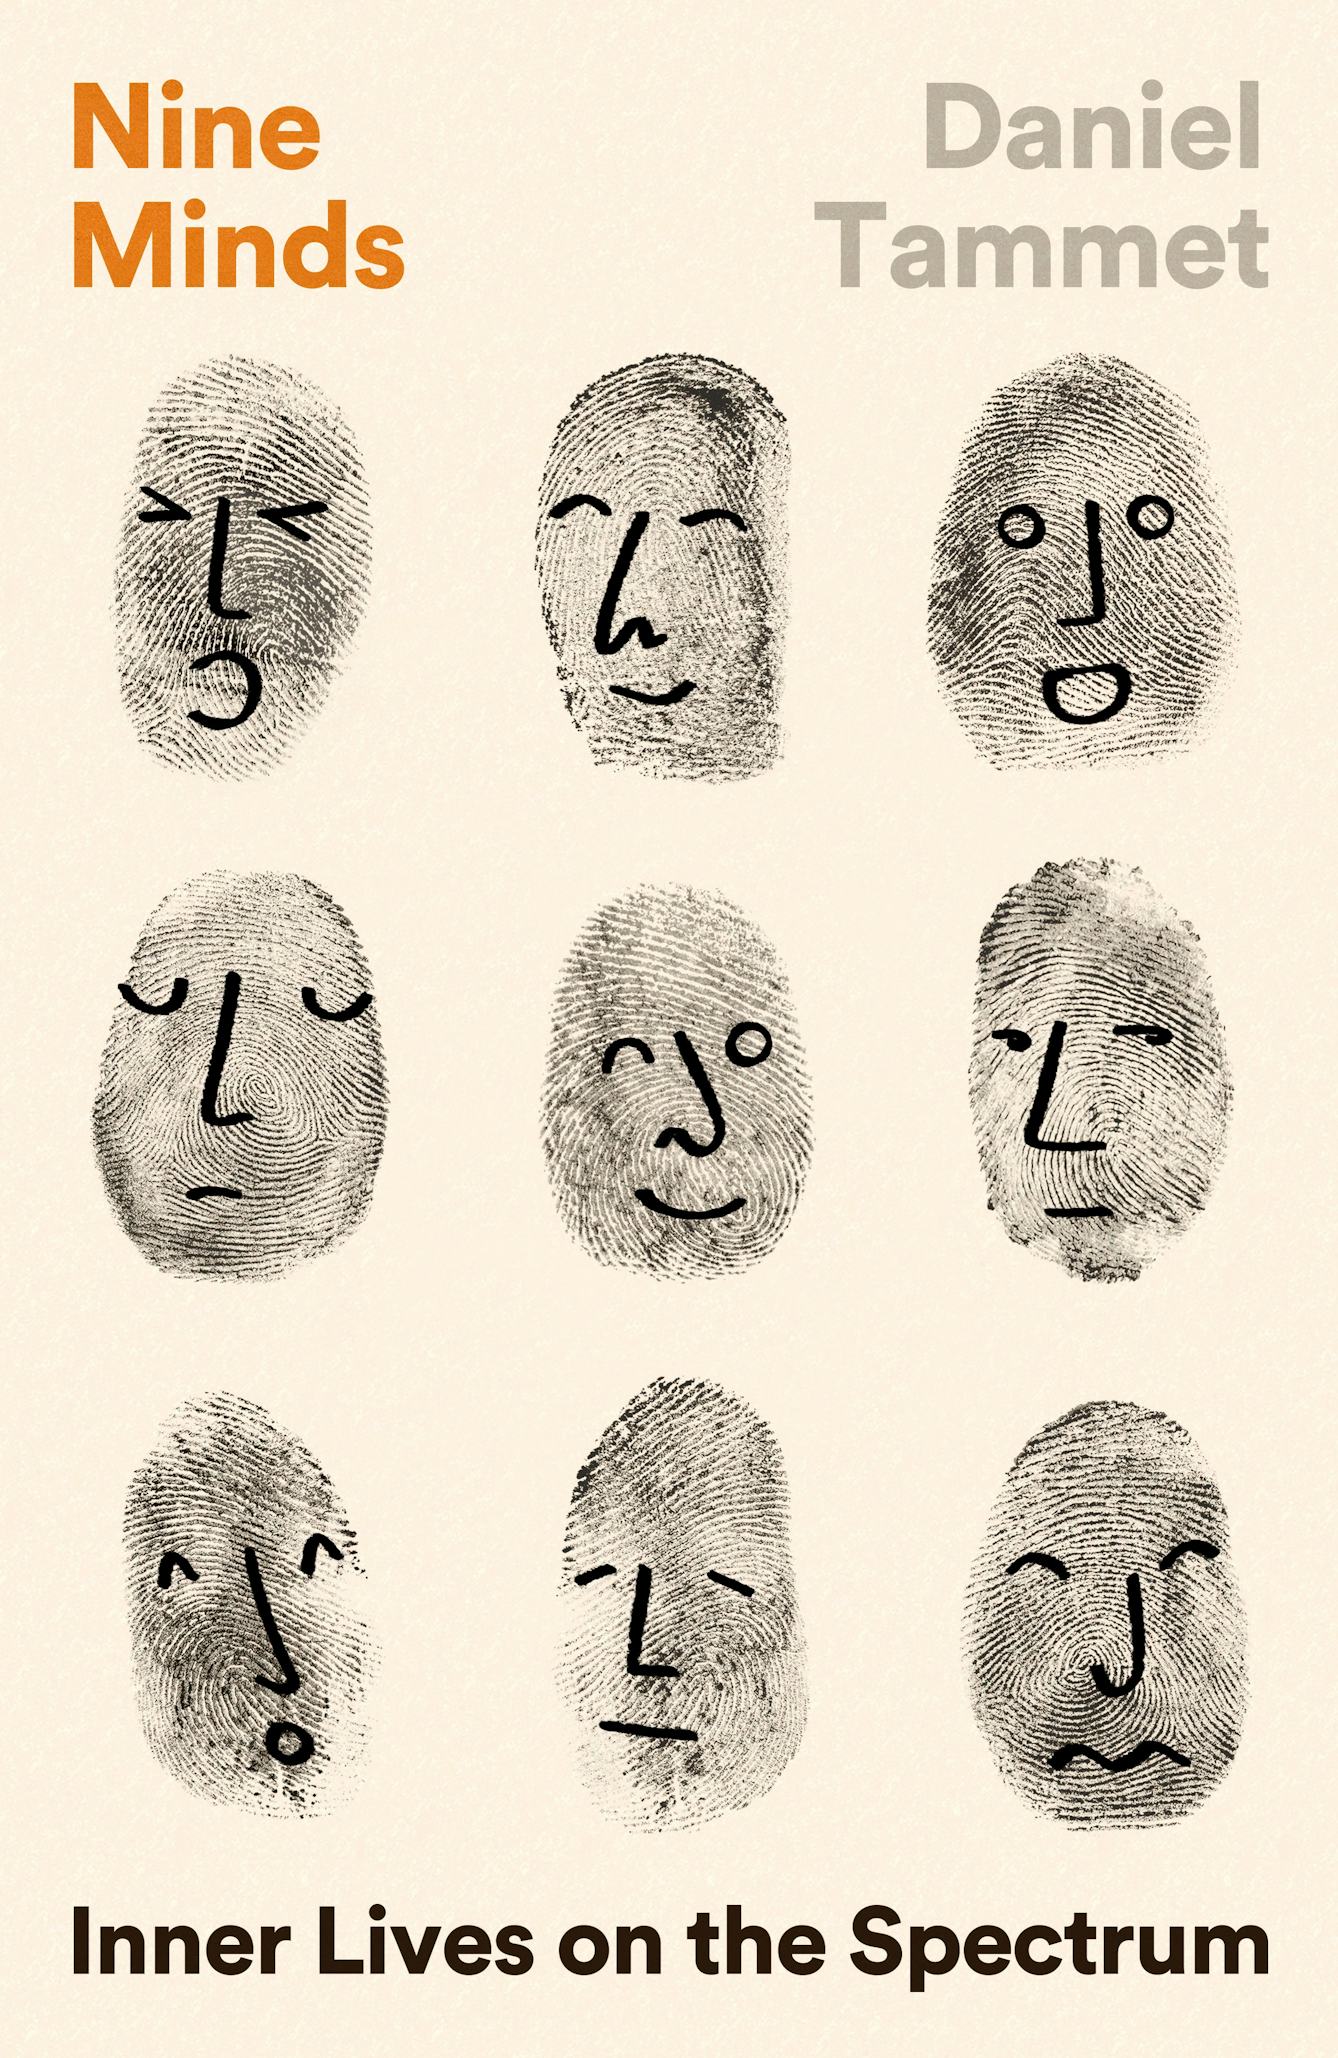 Book cover for 'Nine Minds' by Daniel Tammet